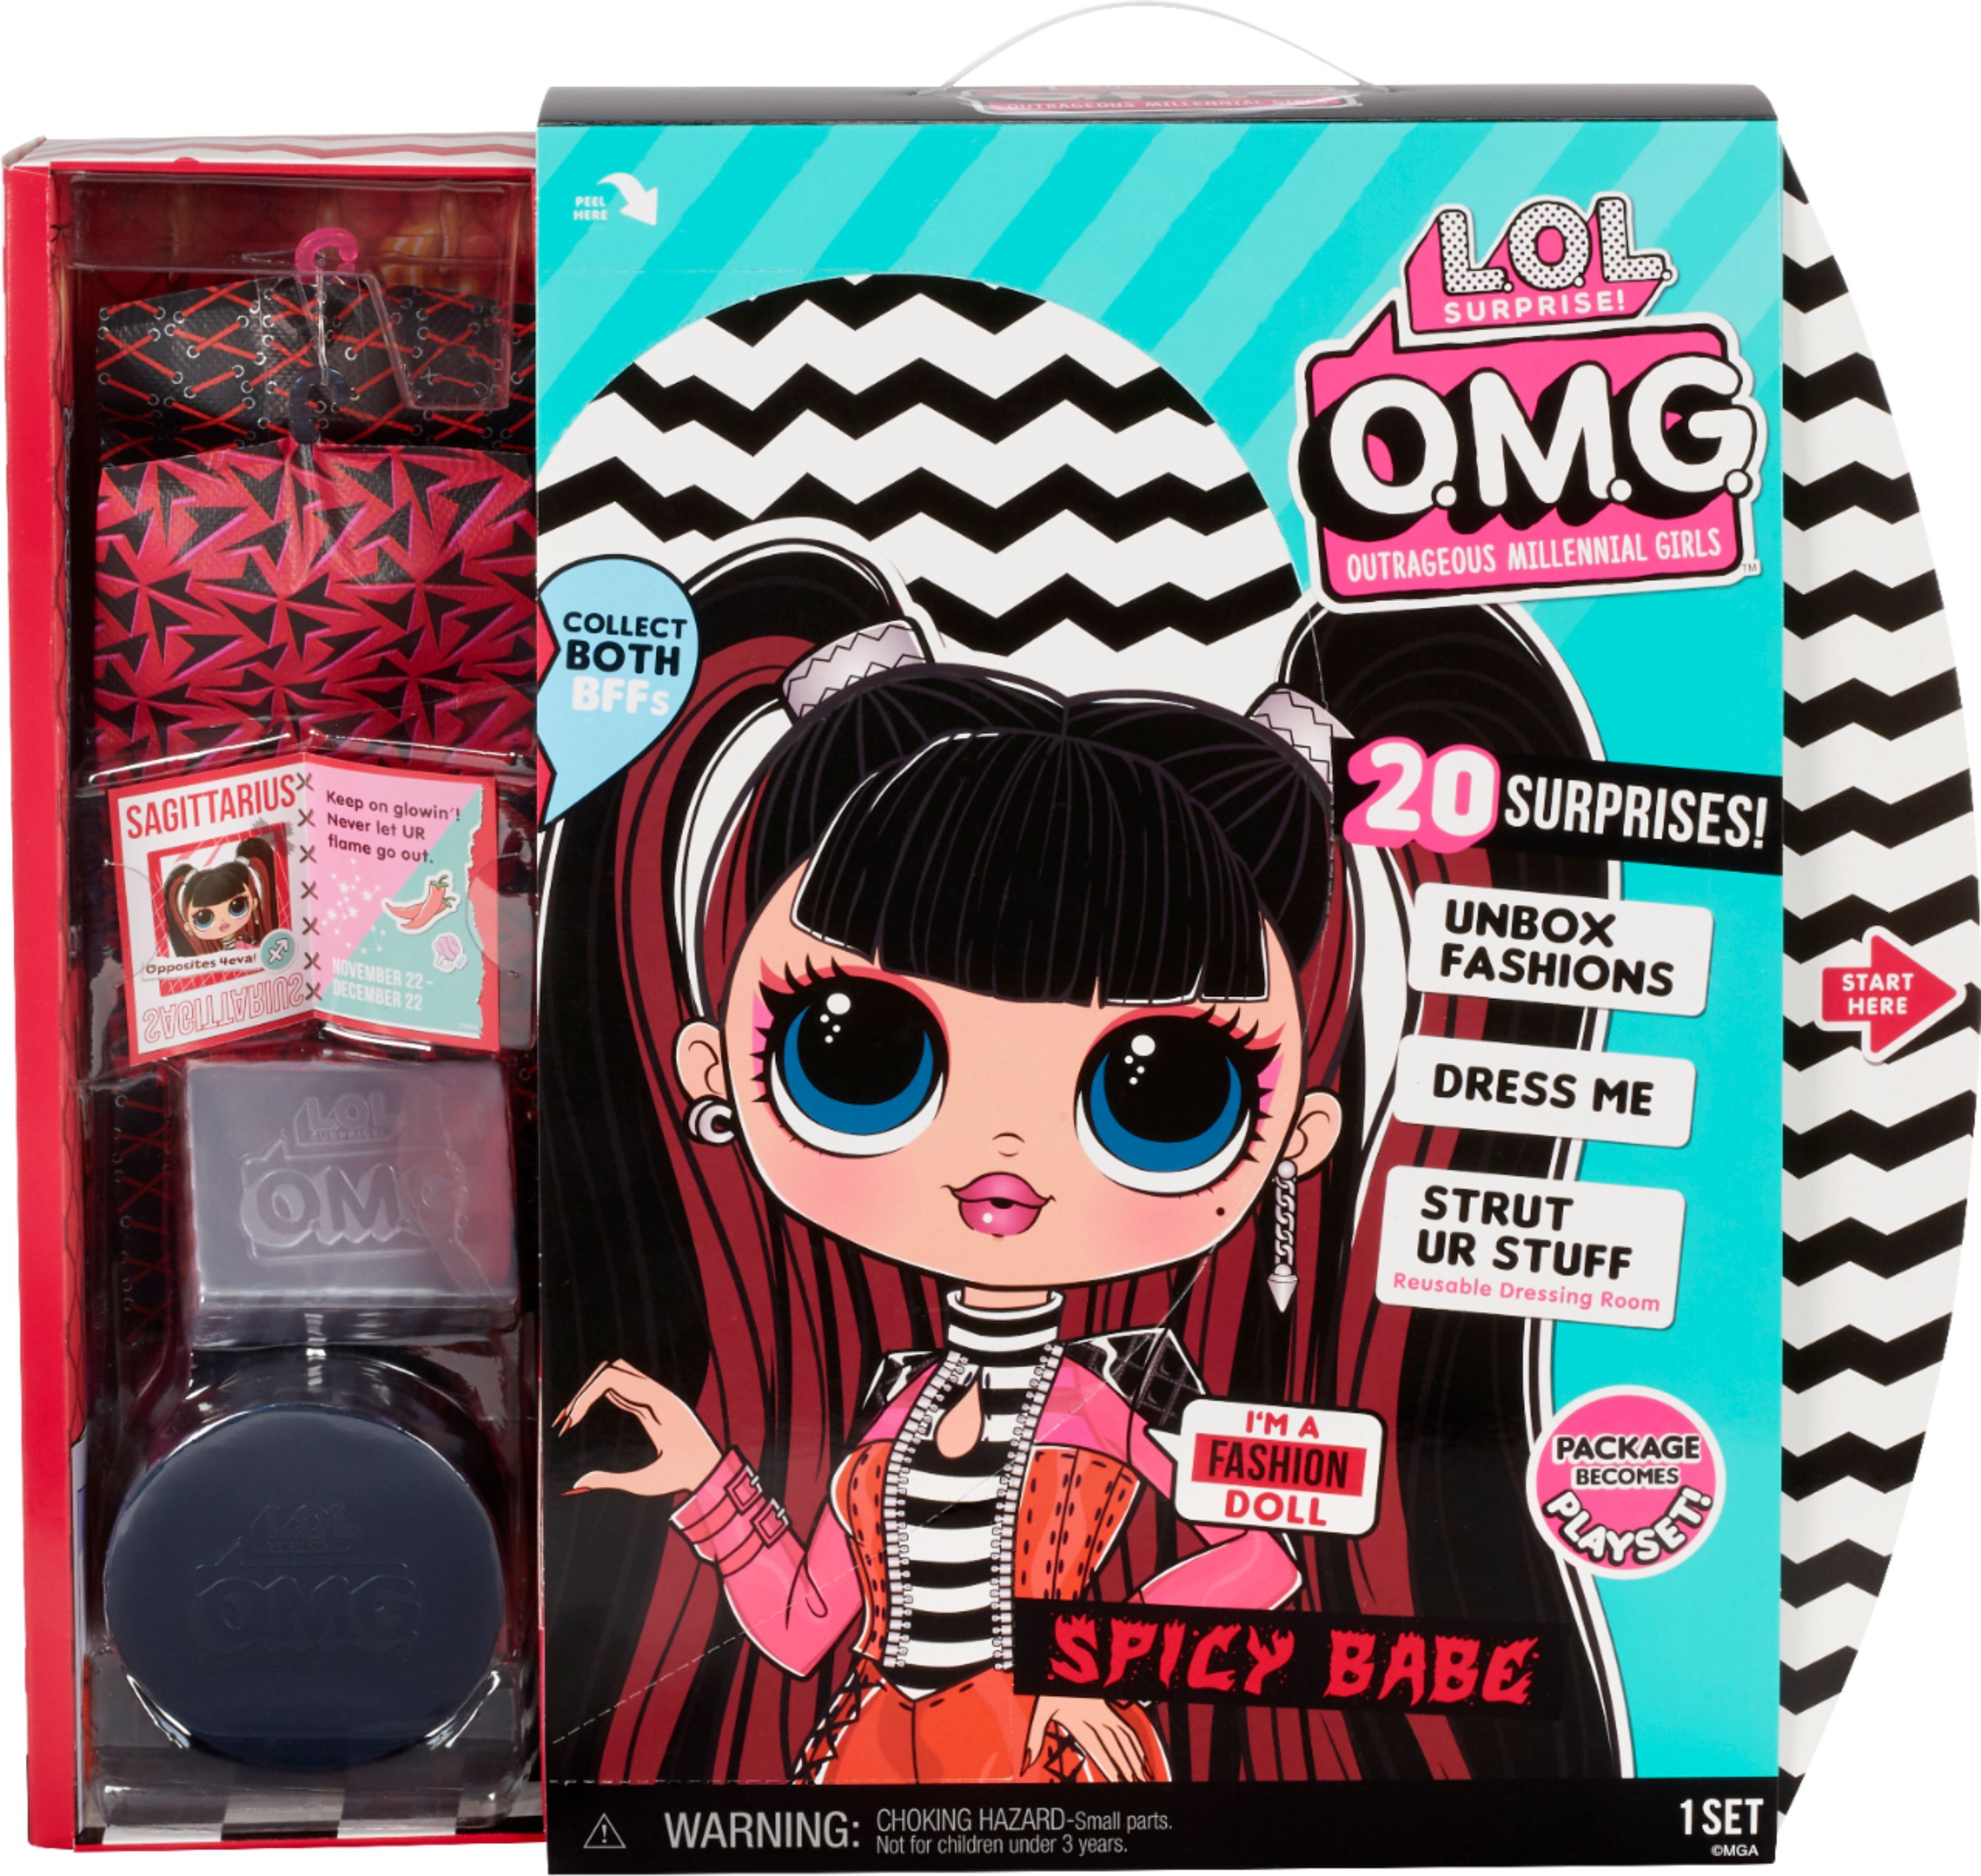 OMG Spicy Babe BFF Fashion Doll 20 Surprises Brand New LOL Surprise 